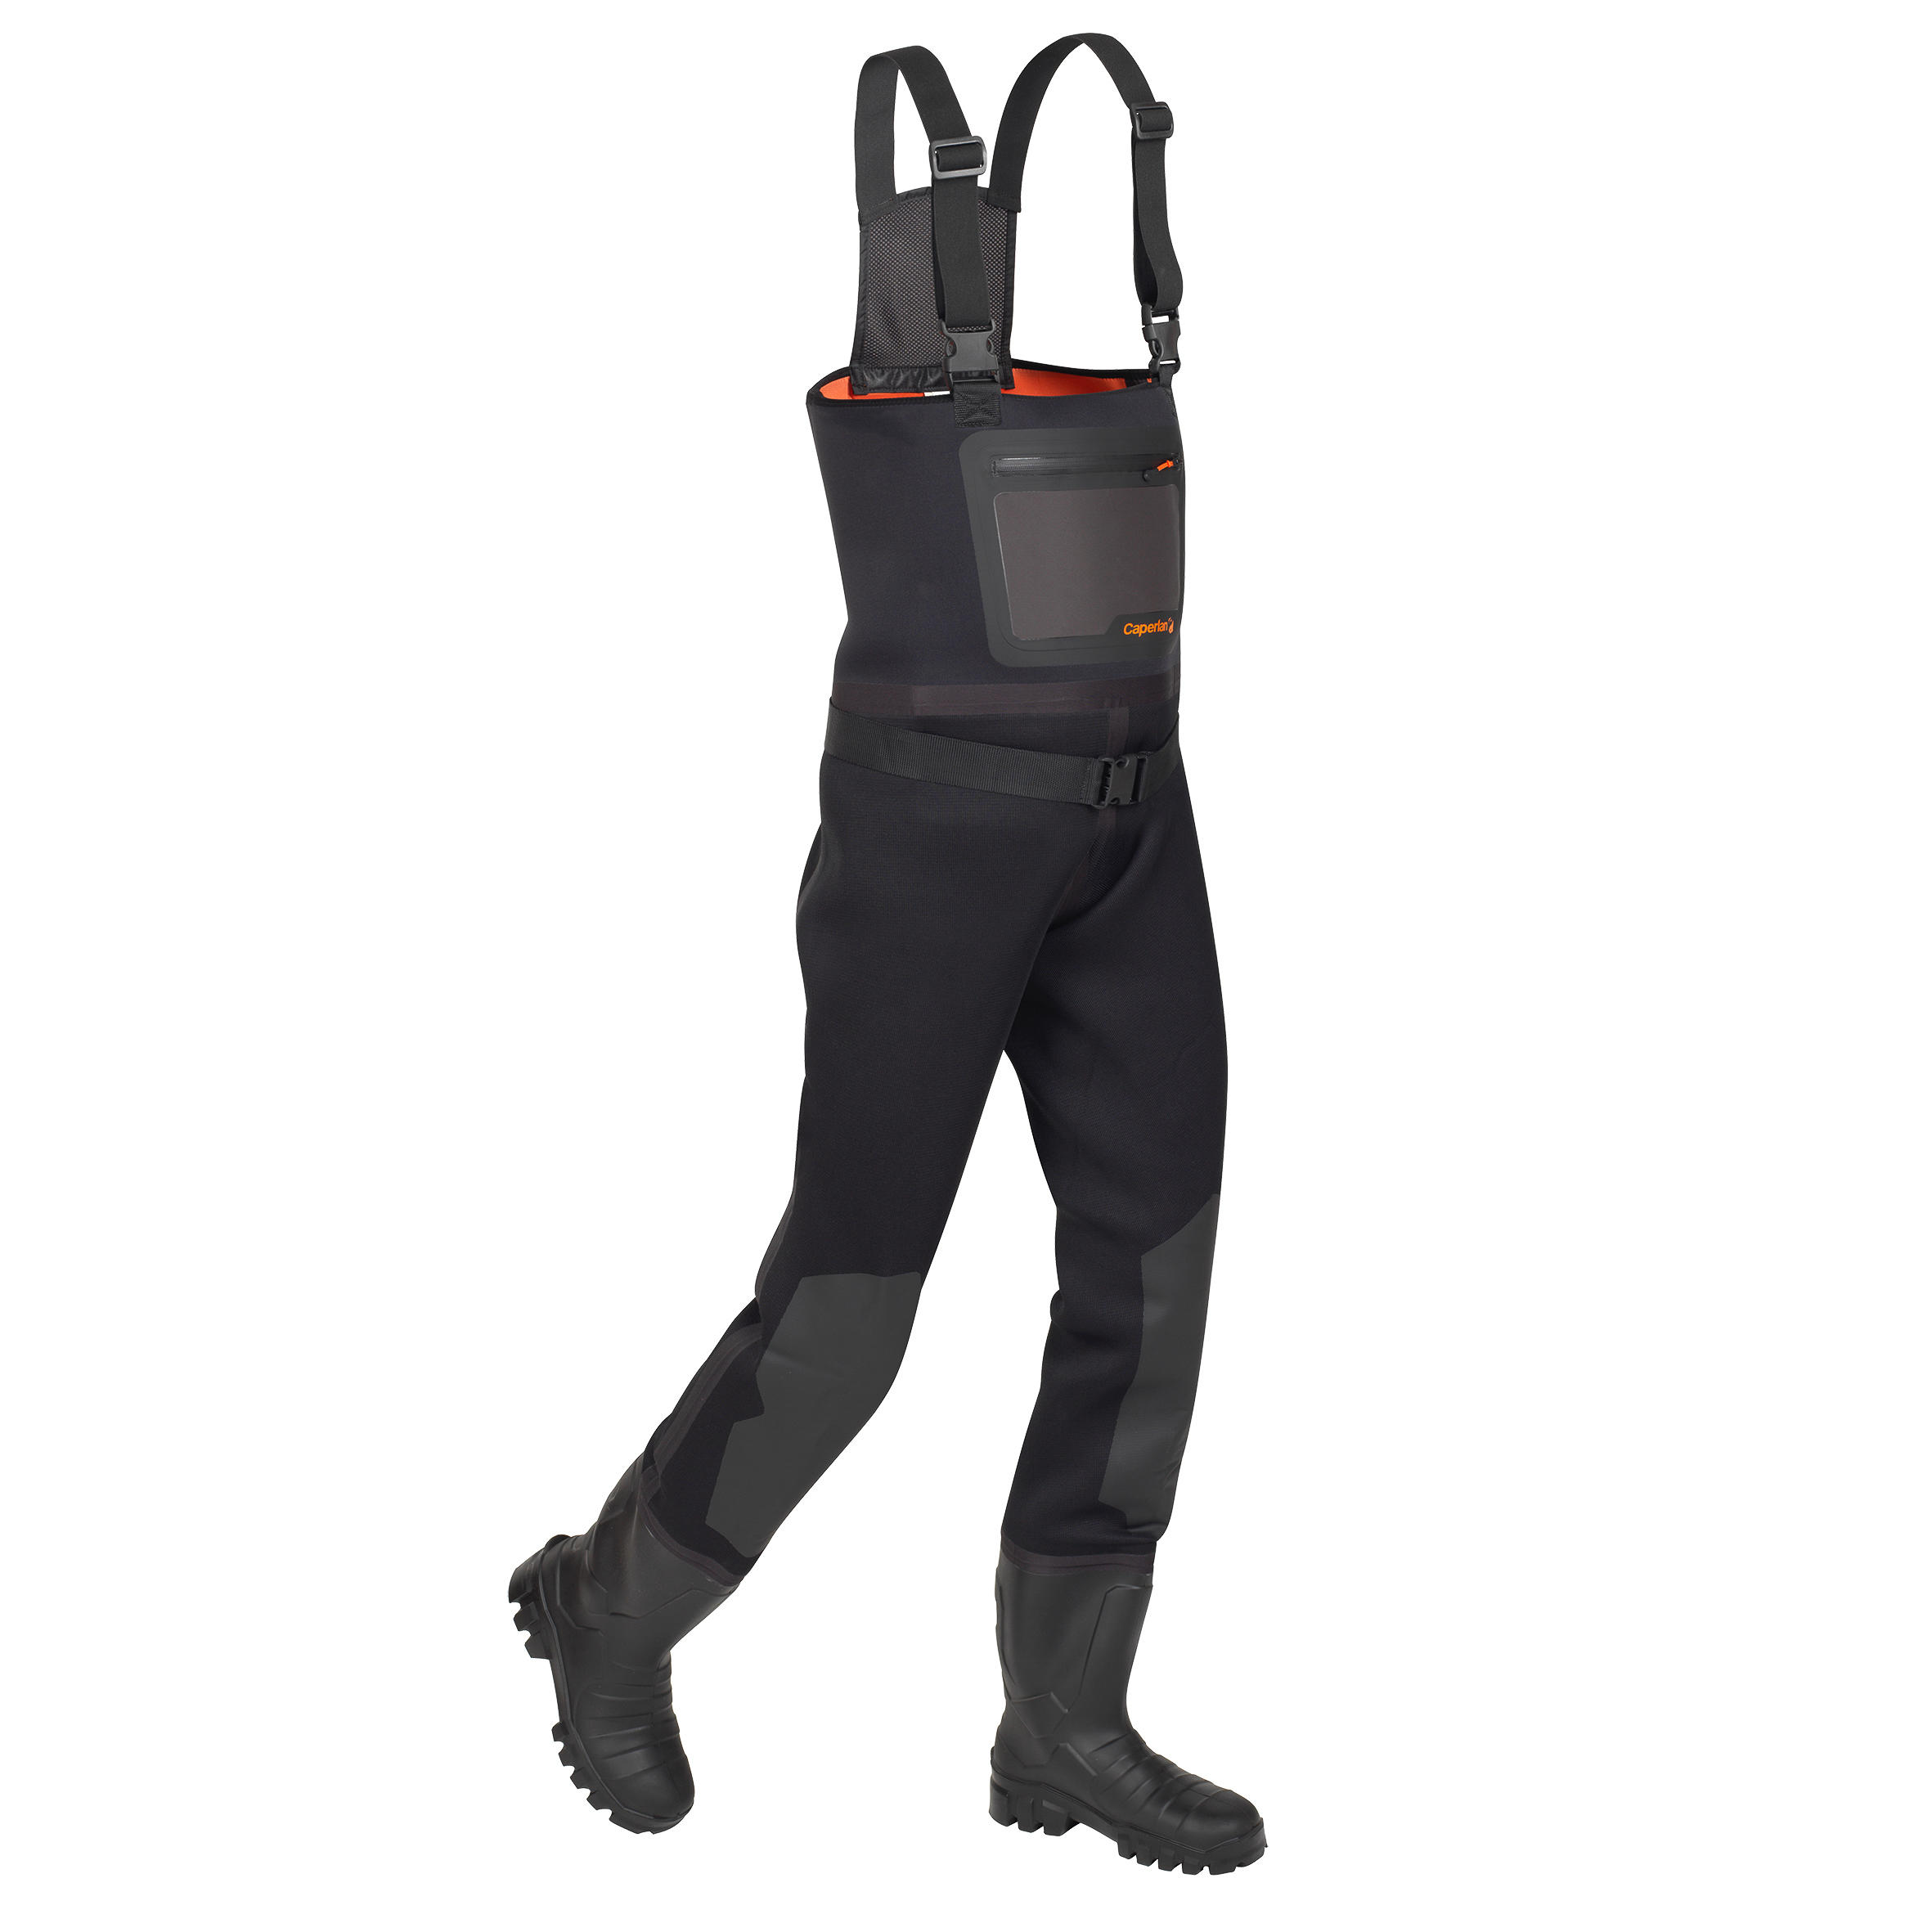 Waders Thermo Pescuit 900 CAPERLAN imagine noua